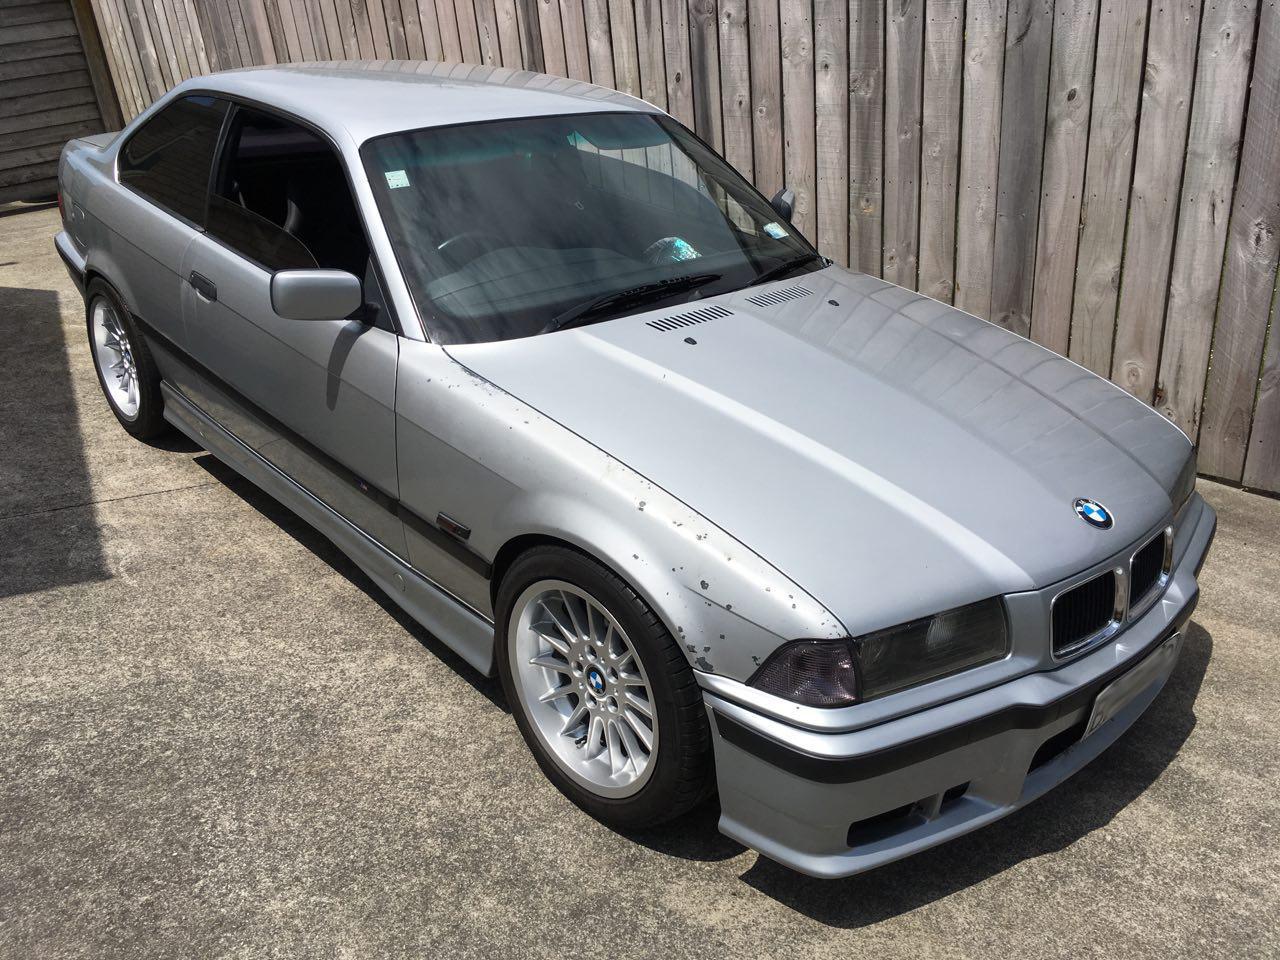 BMW E36 328i With New Wheels And Additions